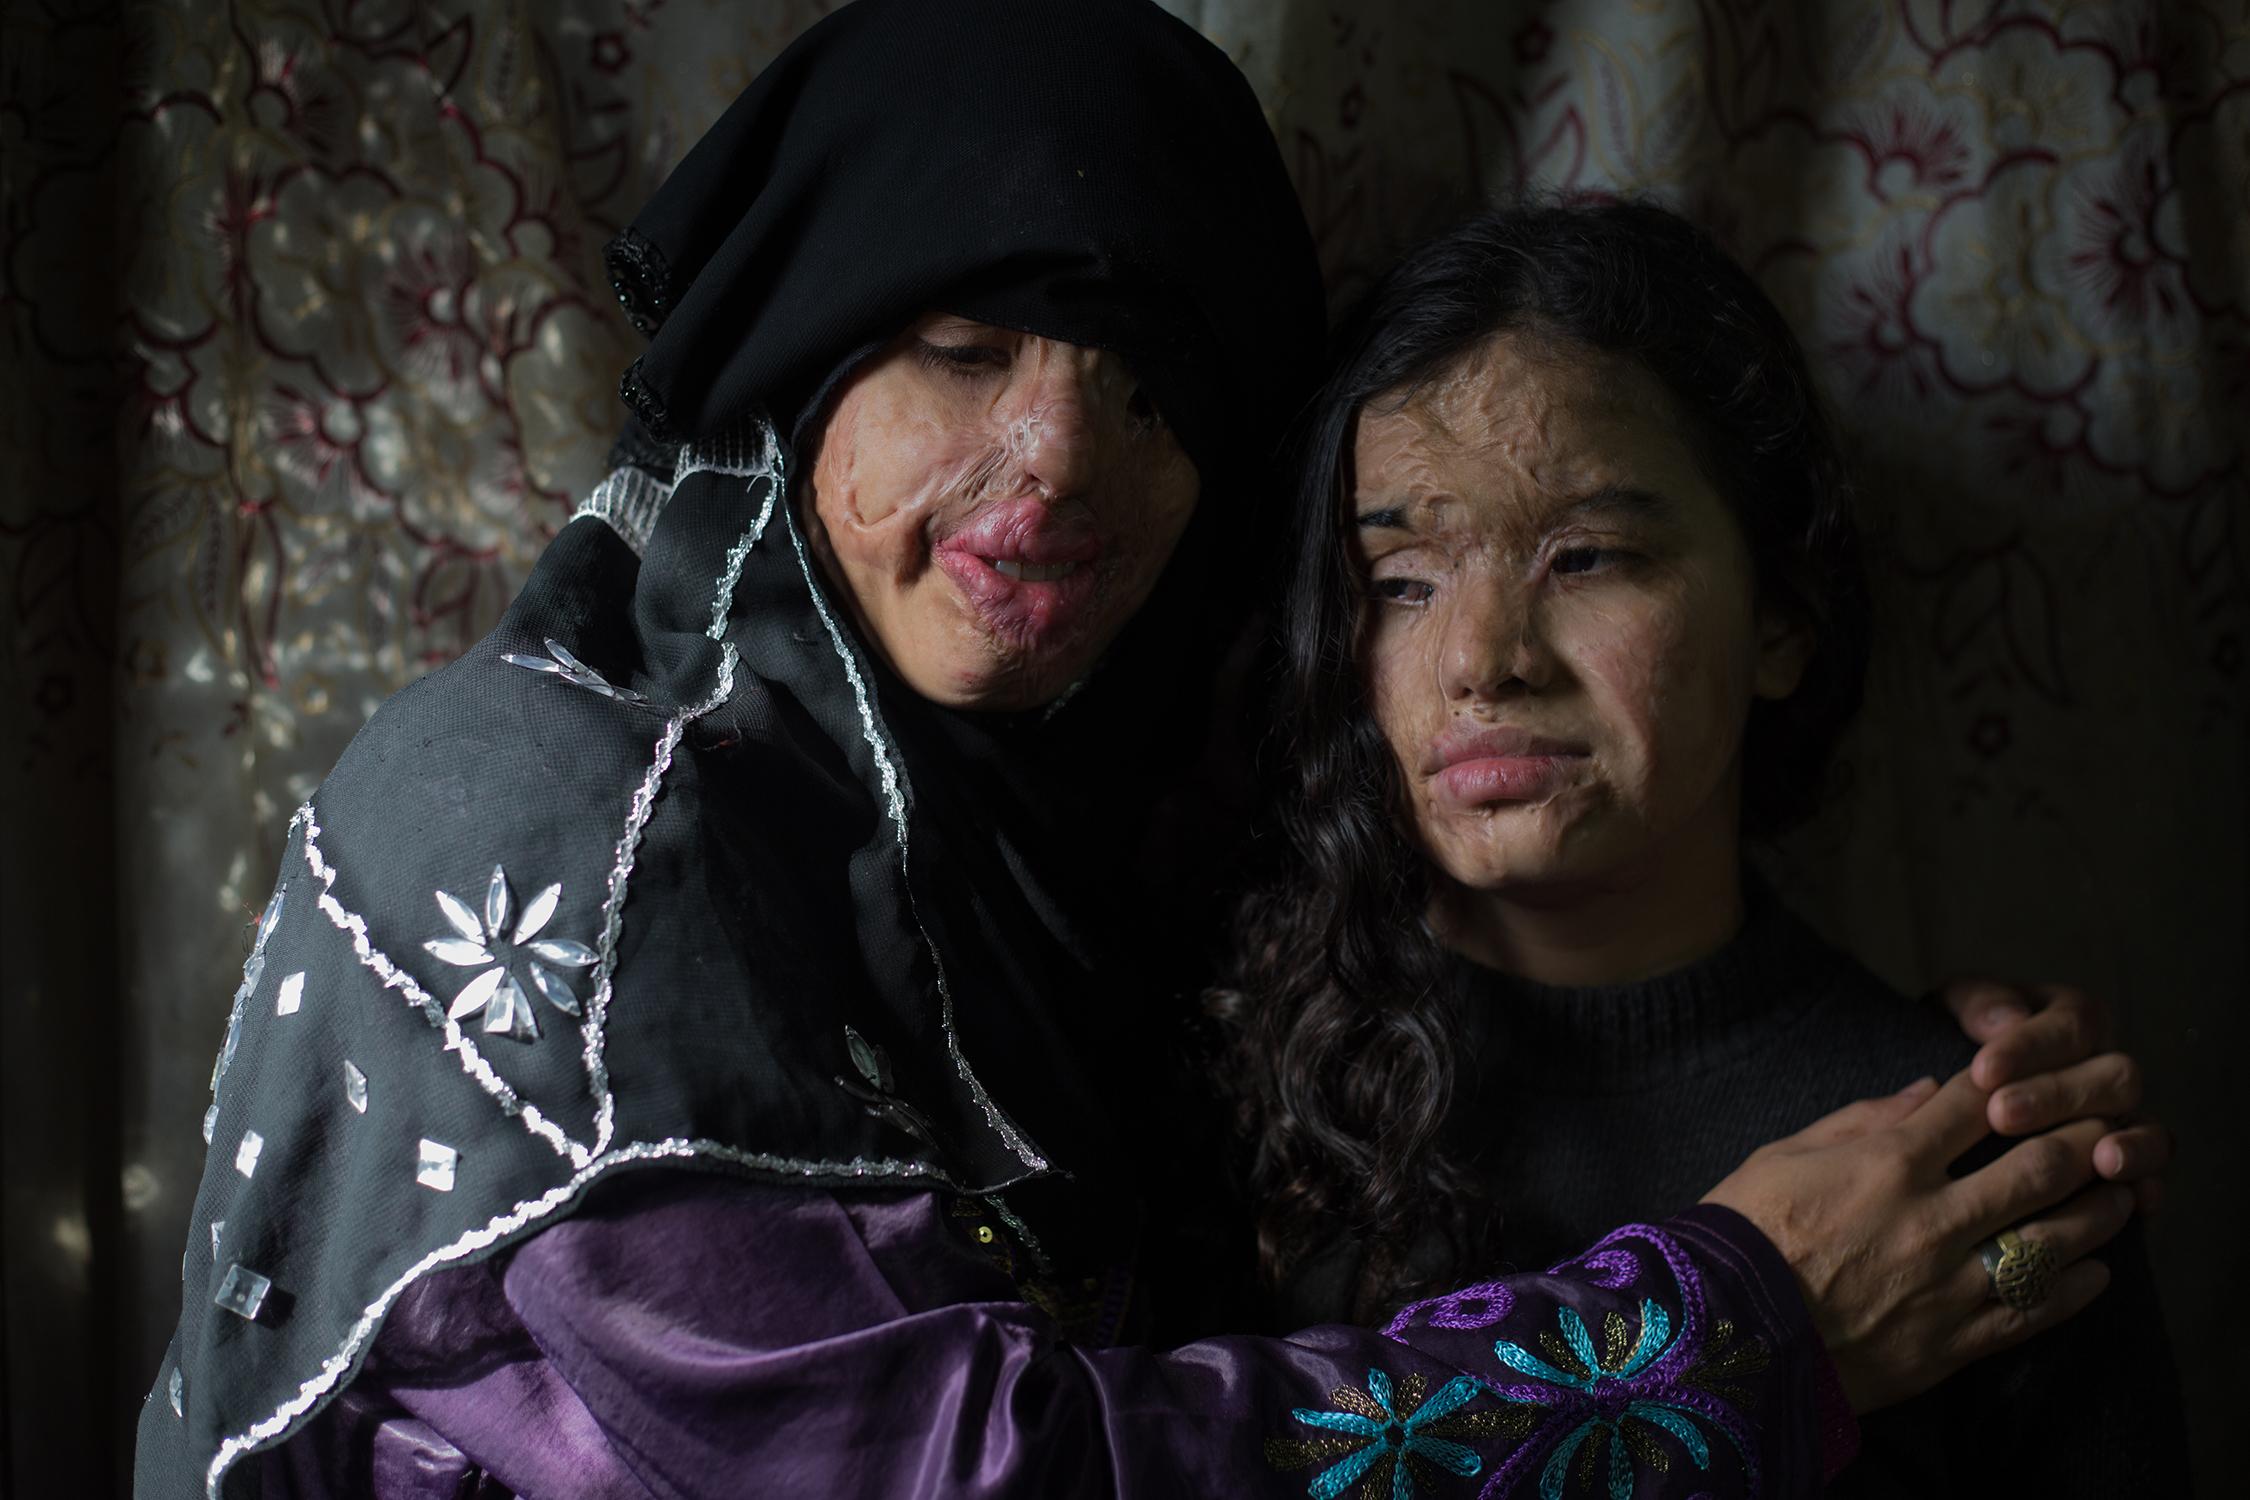 Eman a woman who faced malformation by her husband Eman and her daughter who is 13 years old were attacked with acid after she fill for divorce.